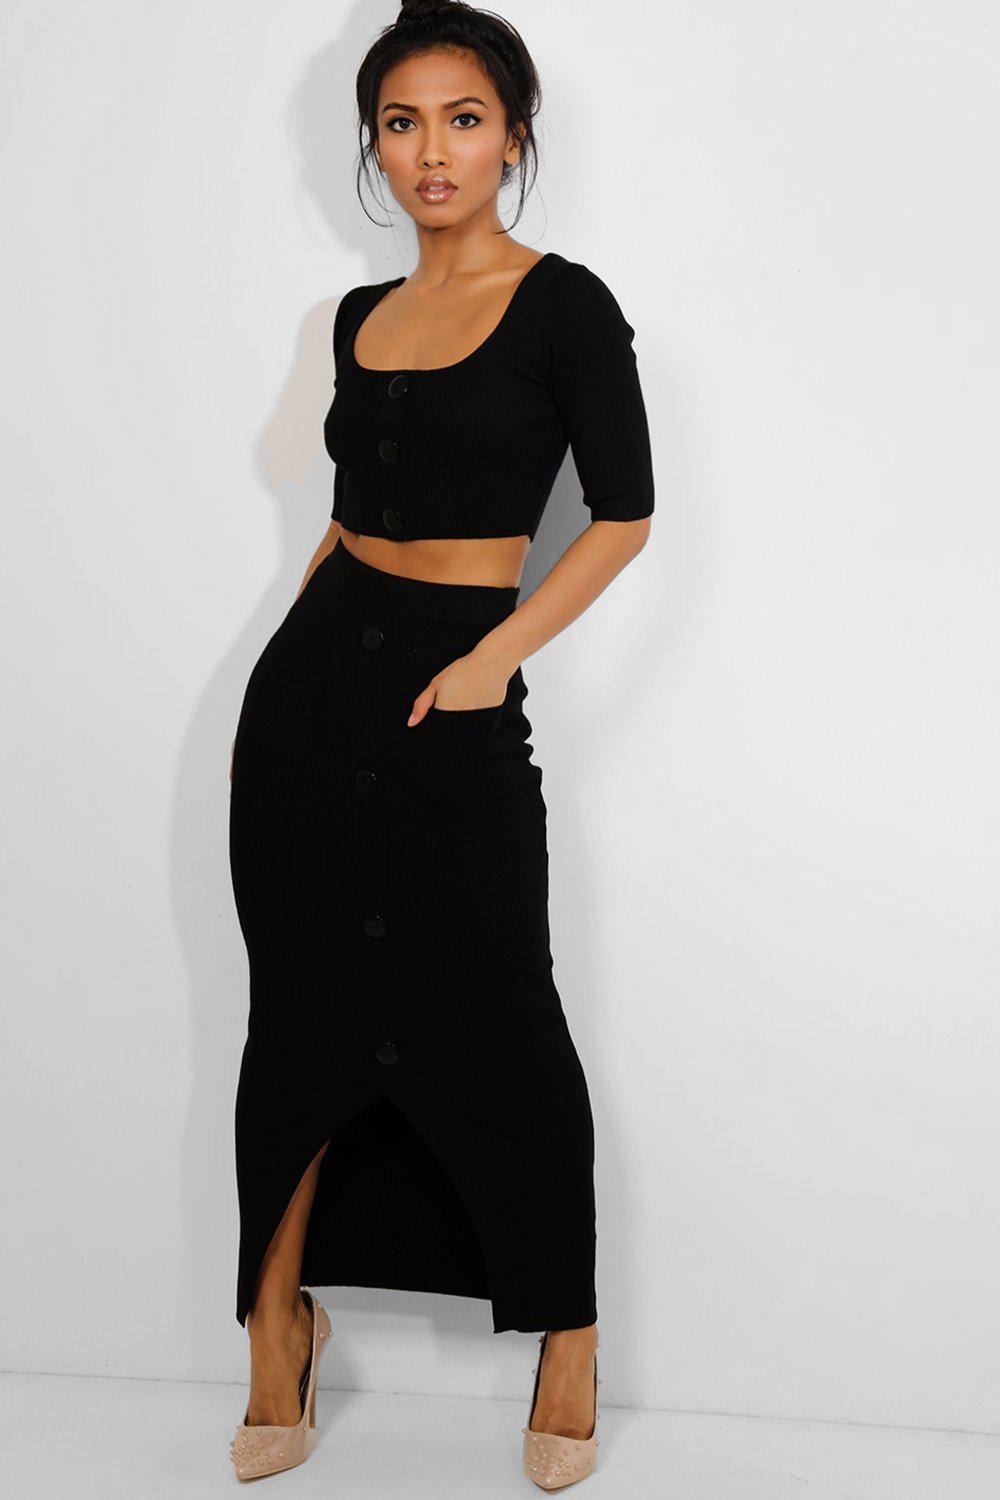 Black Rib Knit Button Details Crop Top And Maxi Skirt Set – SinglePrice